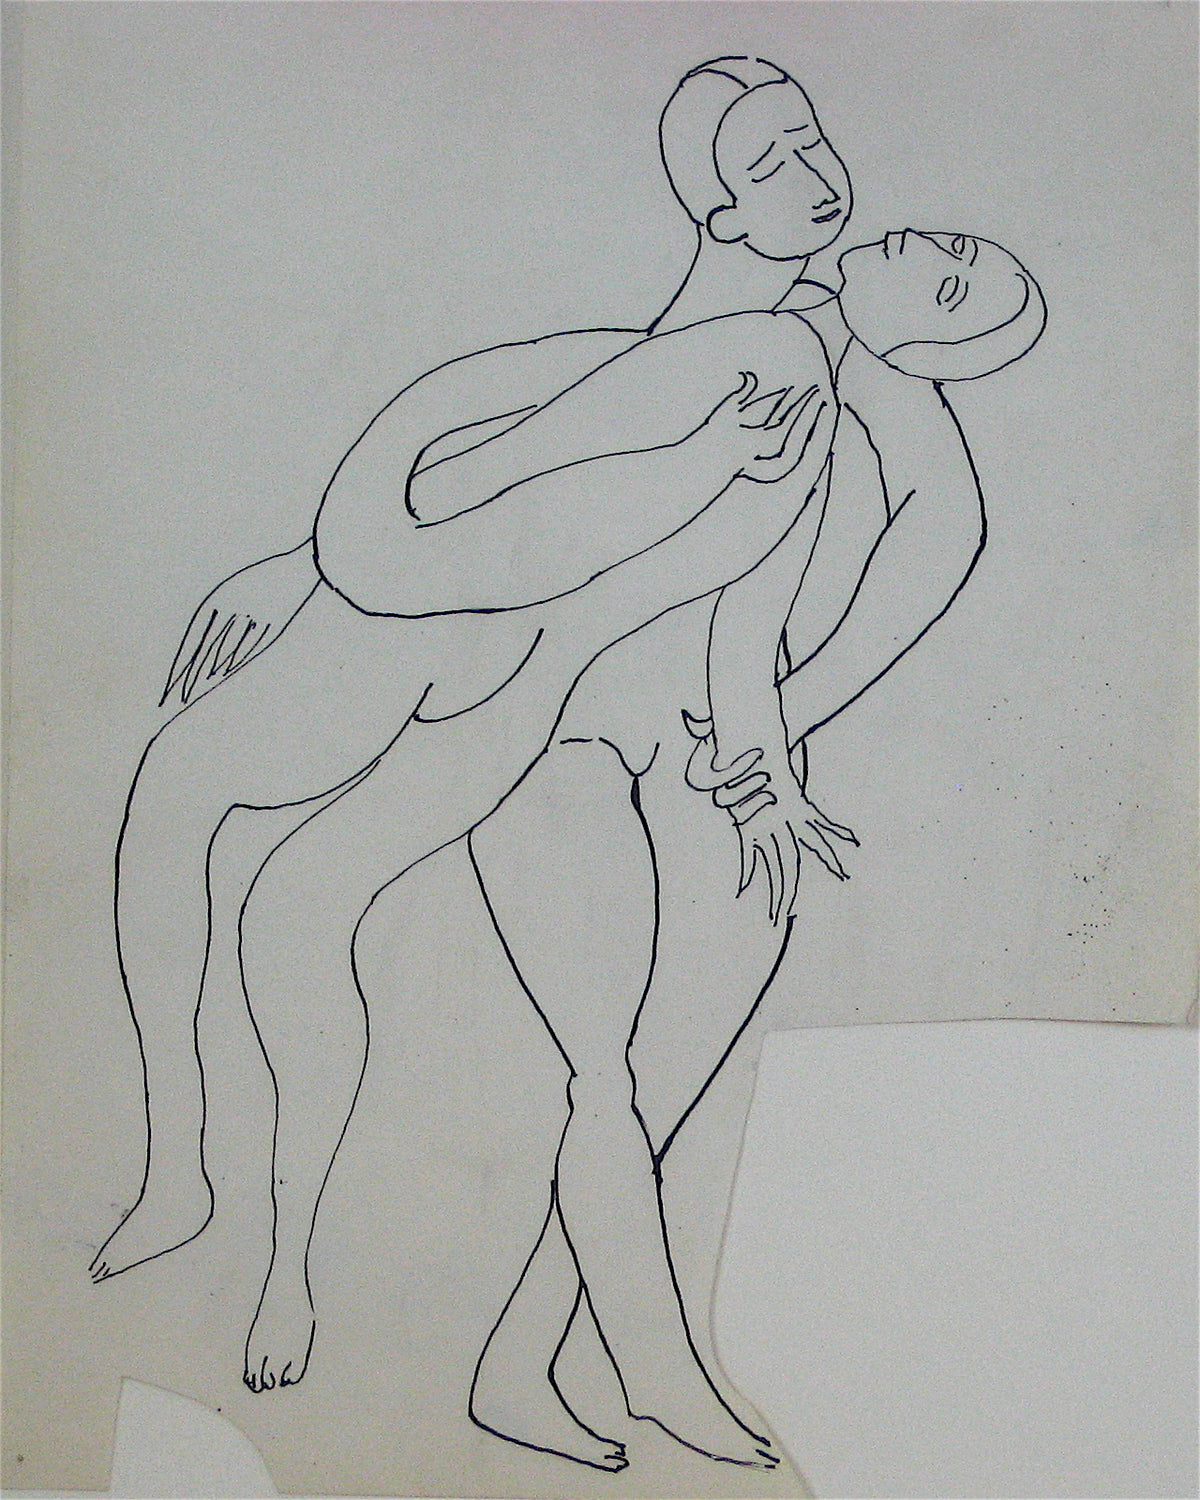 Abstracted Nude Figures Entwined &lt;br&gt;Early 20th Century Ink on Paper &lt;br&gt;&lt;br&gt;#11230